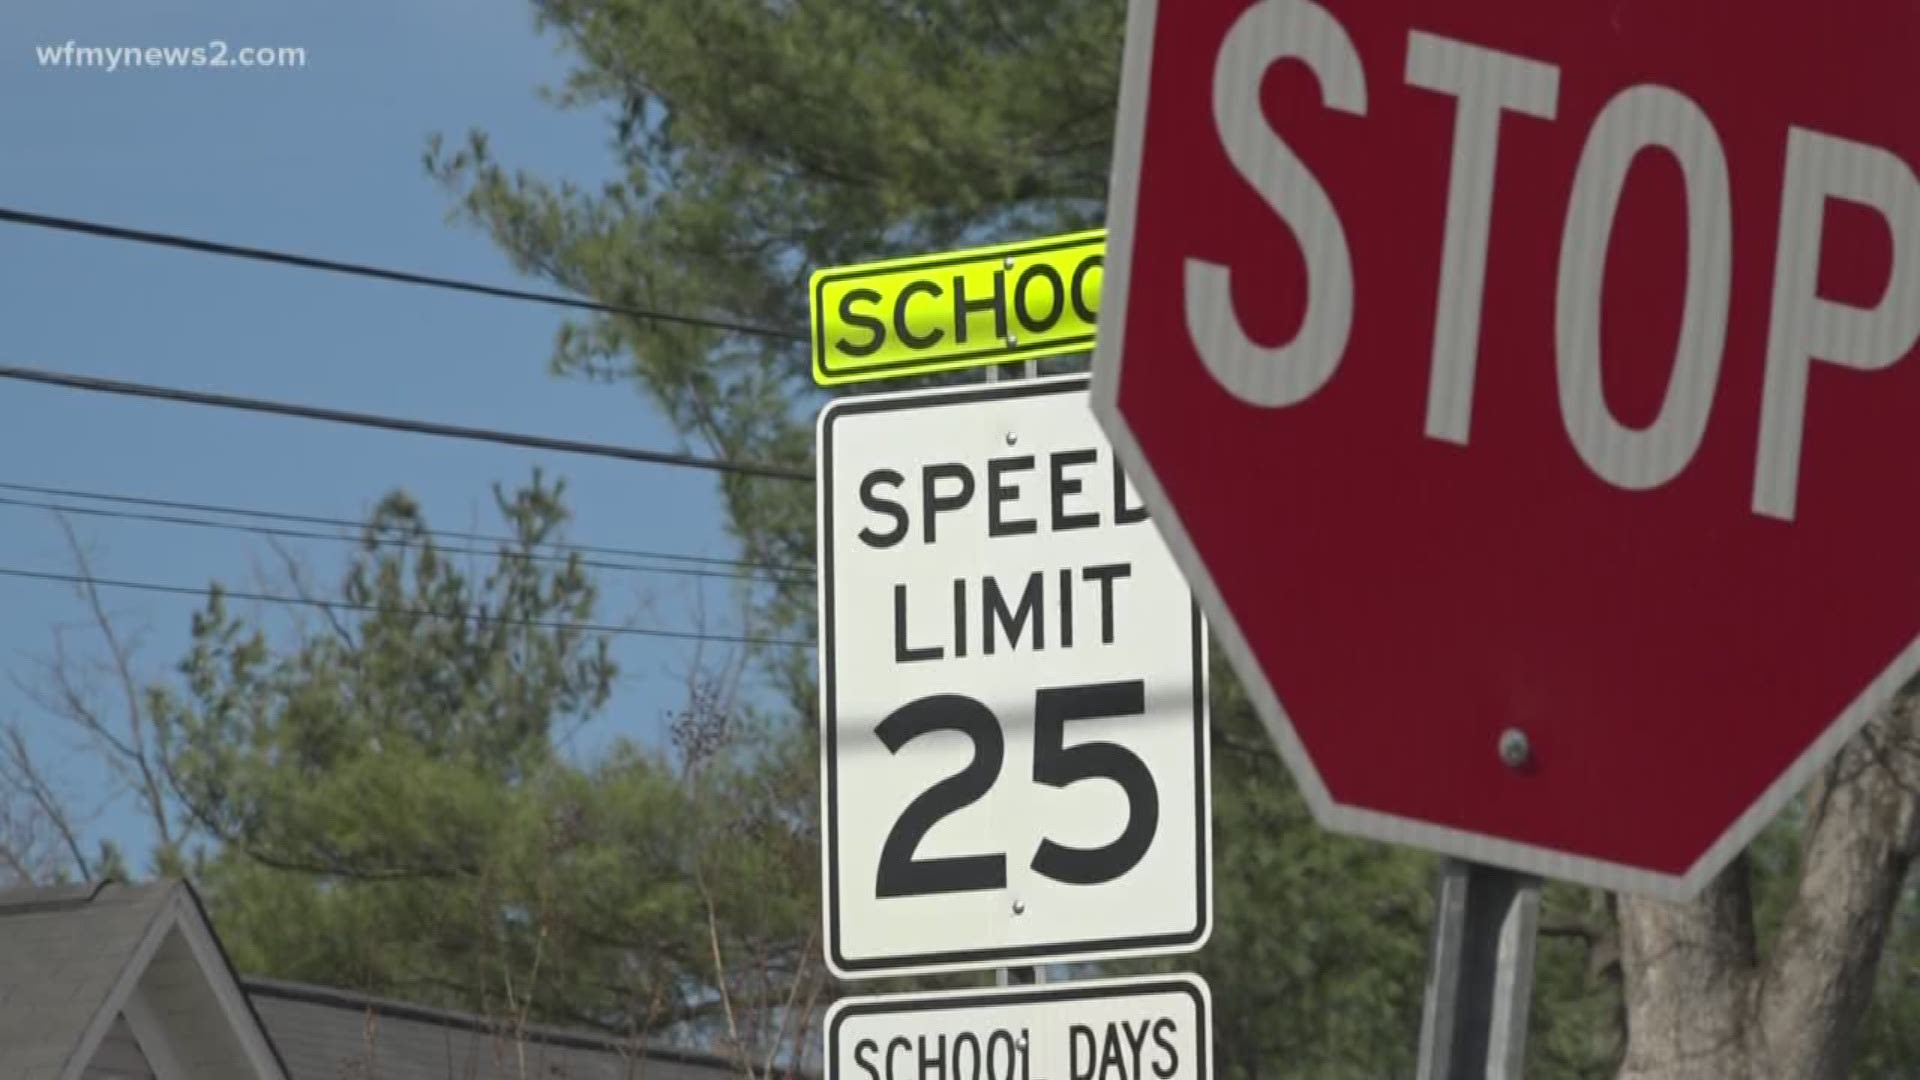 When a school bus stops and deploys a stop arm, the law says you must stop. But one Winston-Salem mother saw a driver go around the bus anyways.